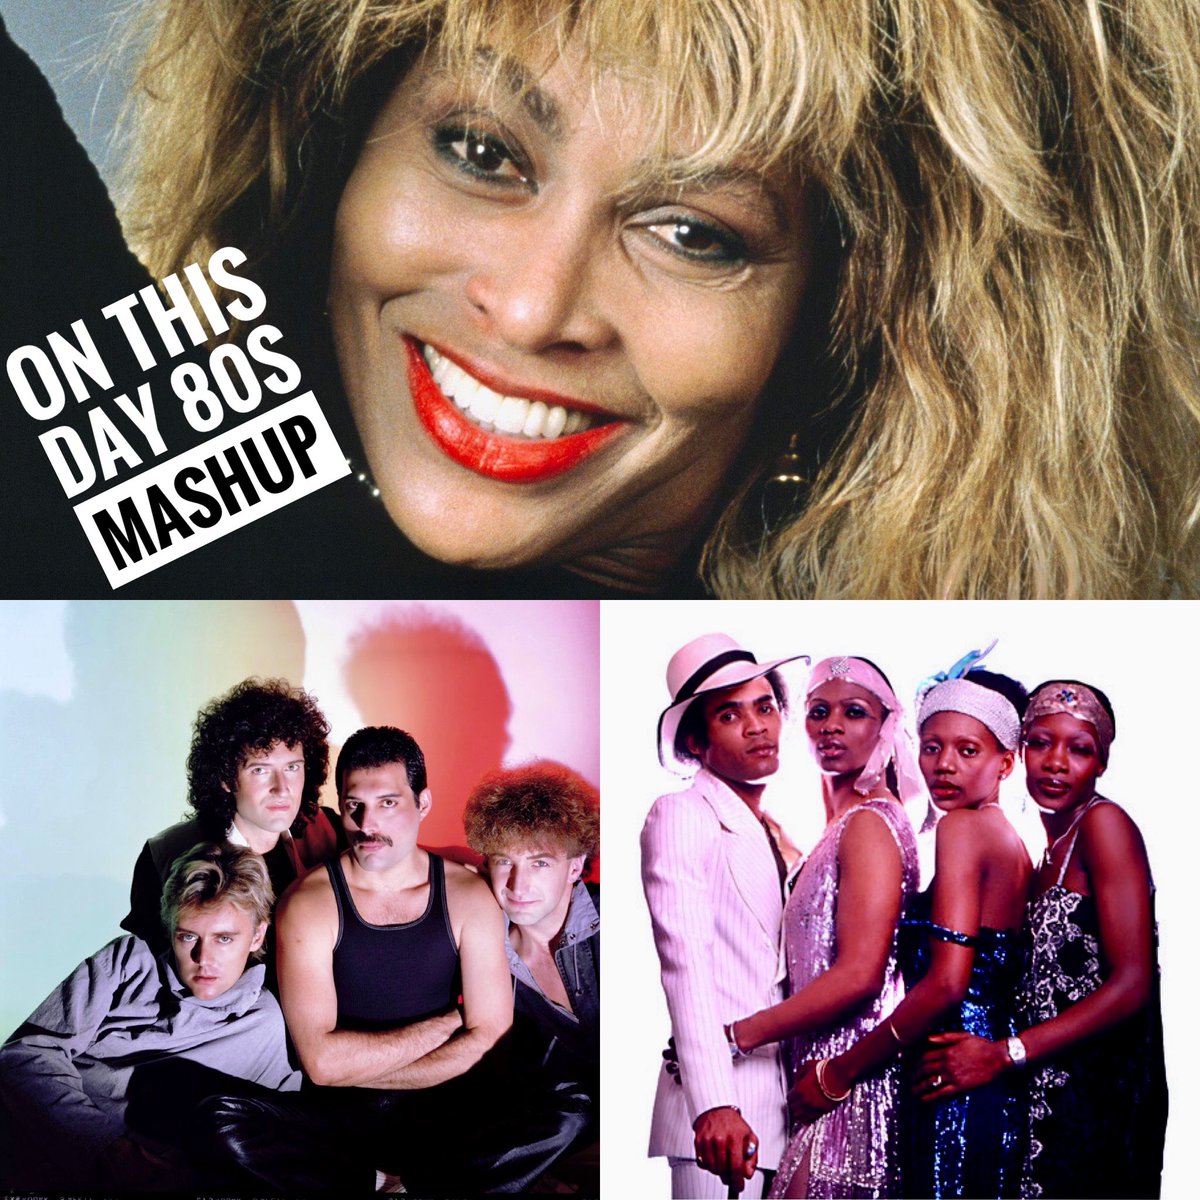 #OnThisDay80s

MASHUP

Tina Turner and Queen vs Boney M

“Daddy’s Steamy Windows”

How to listen? Go to OnThisDay80s.com / OnThisDay80s.co.uk

#80s #80smusic #MashUp